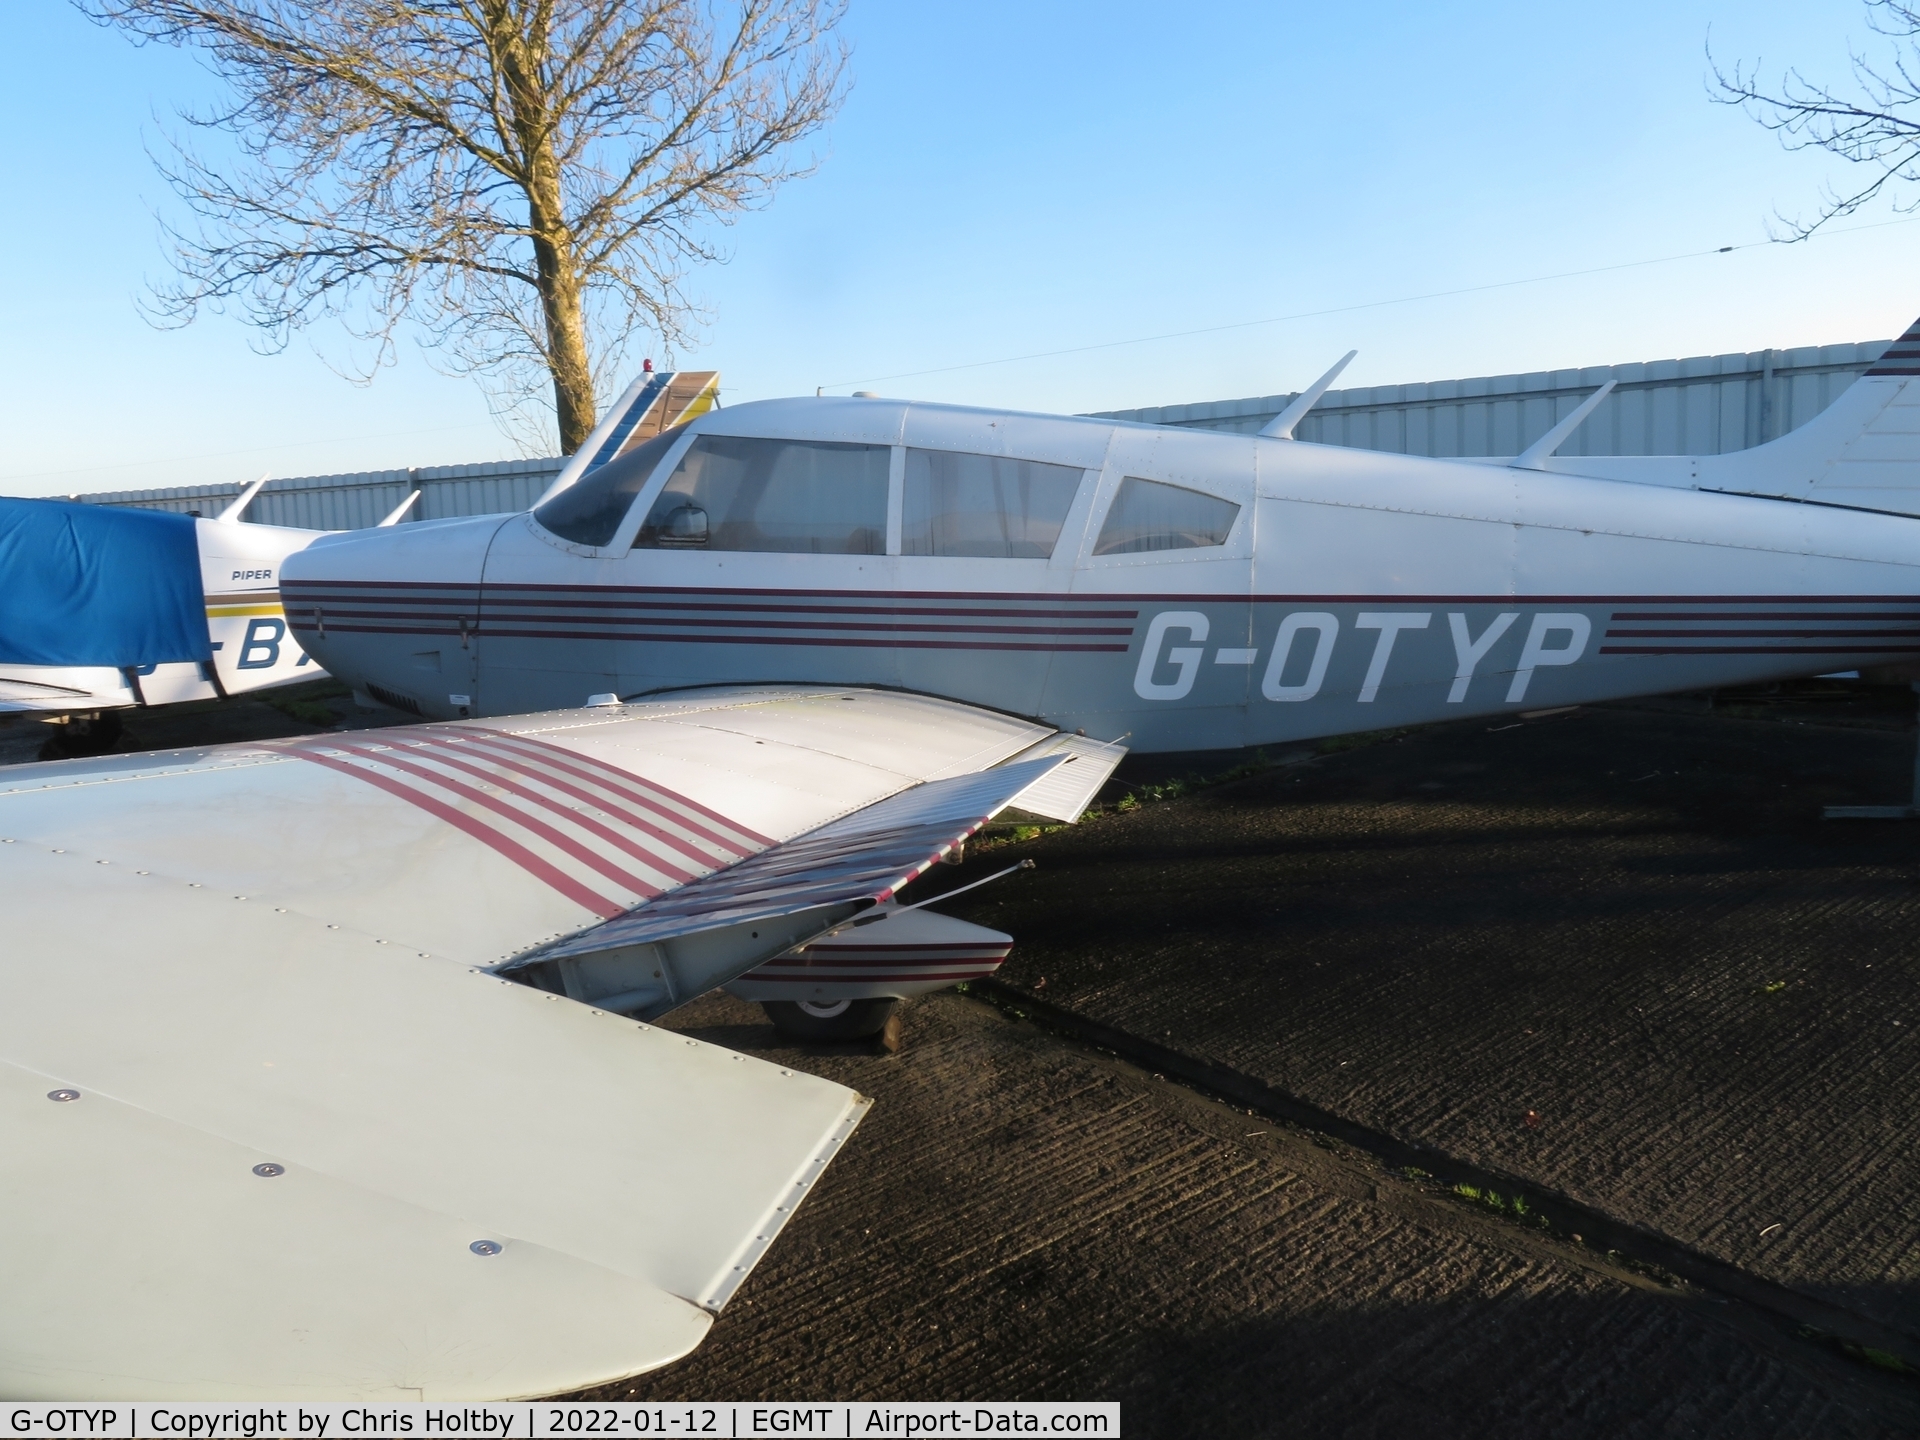 G-OTYP, 1973 Piper PA-28-180 Cherokee Challenger C/N 28-7305166, Parked and stored at Thurrock Airfield, Essex